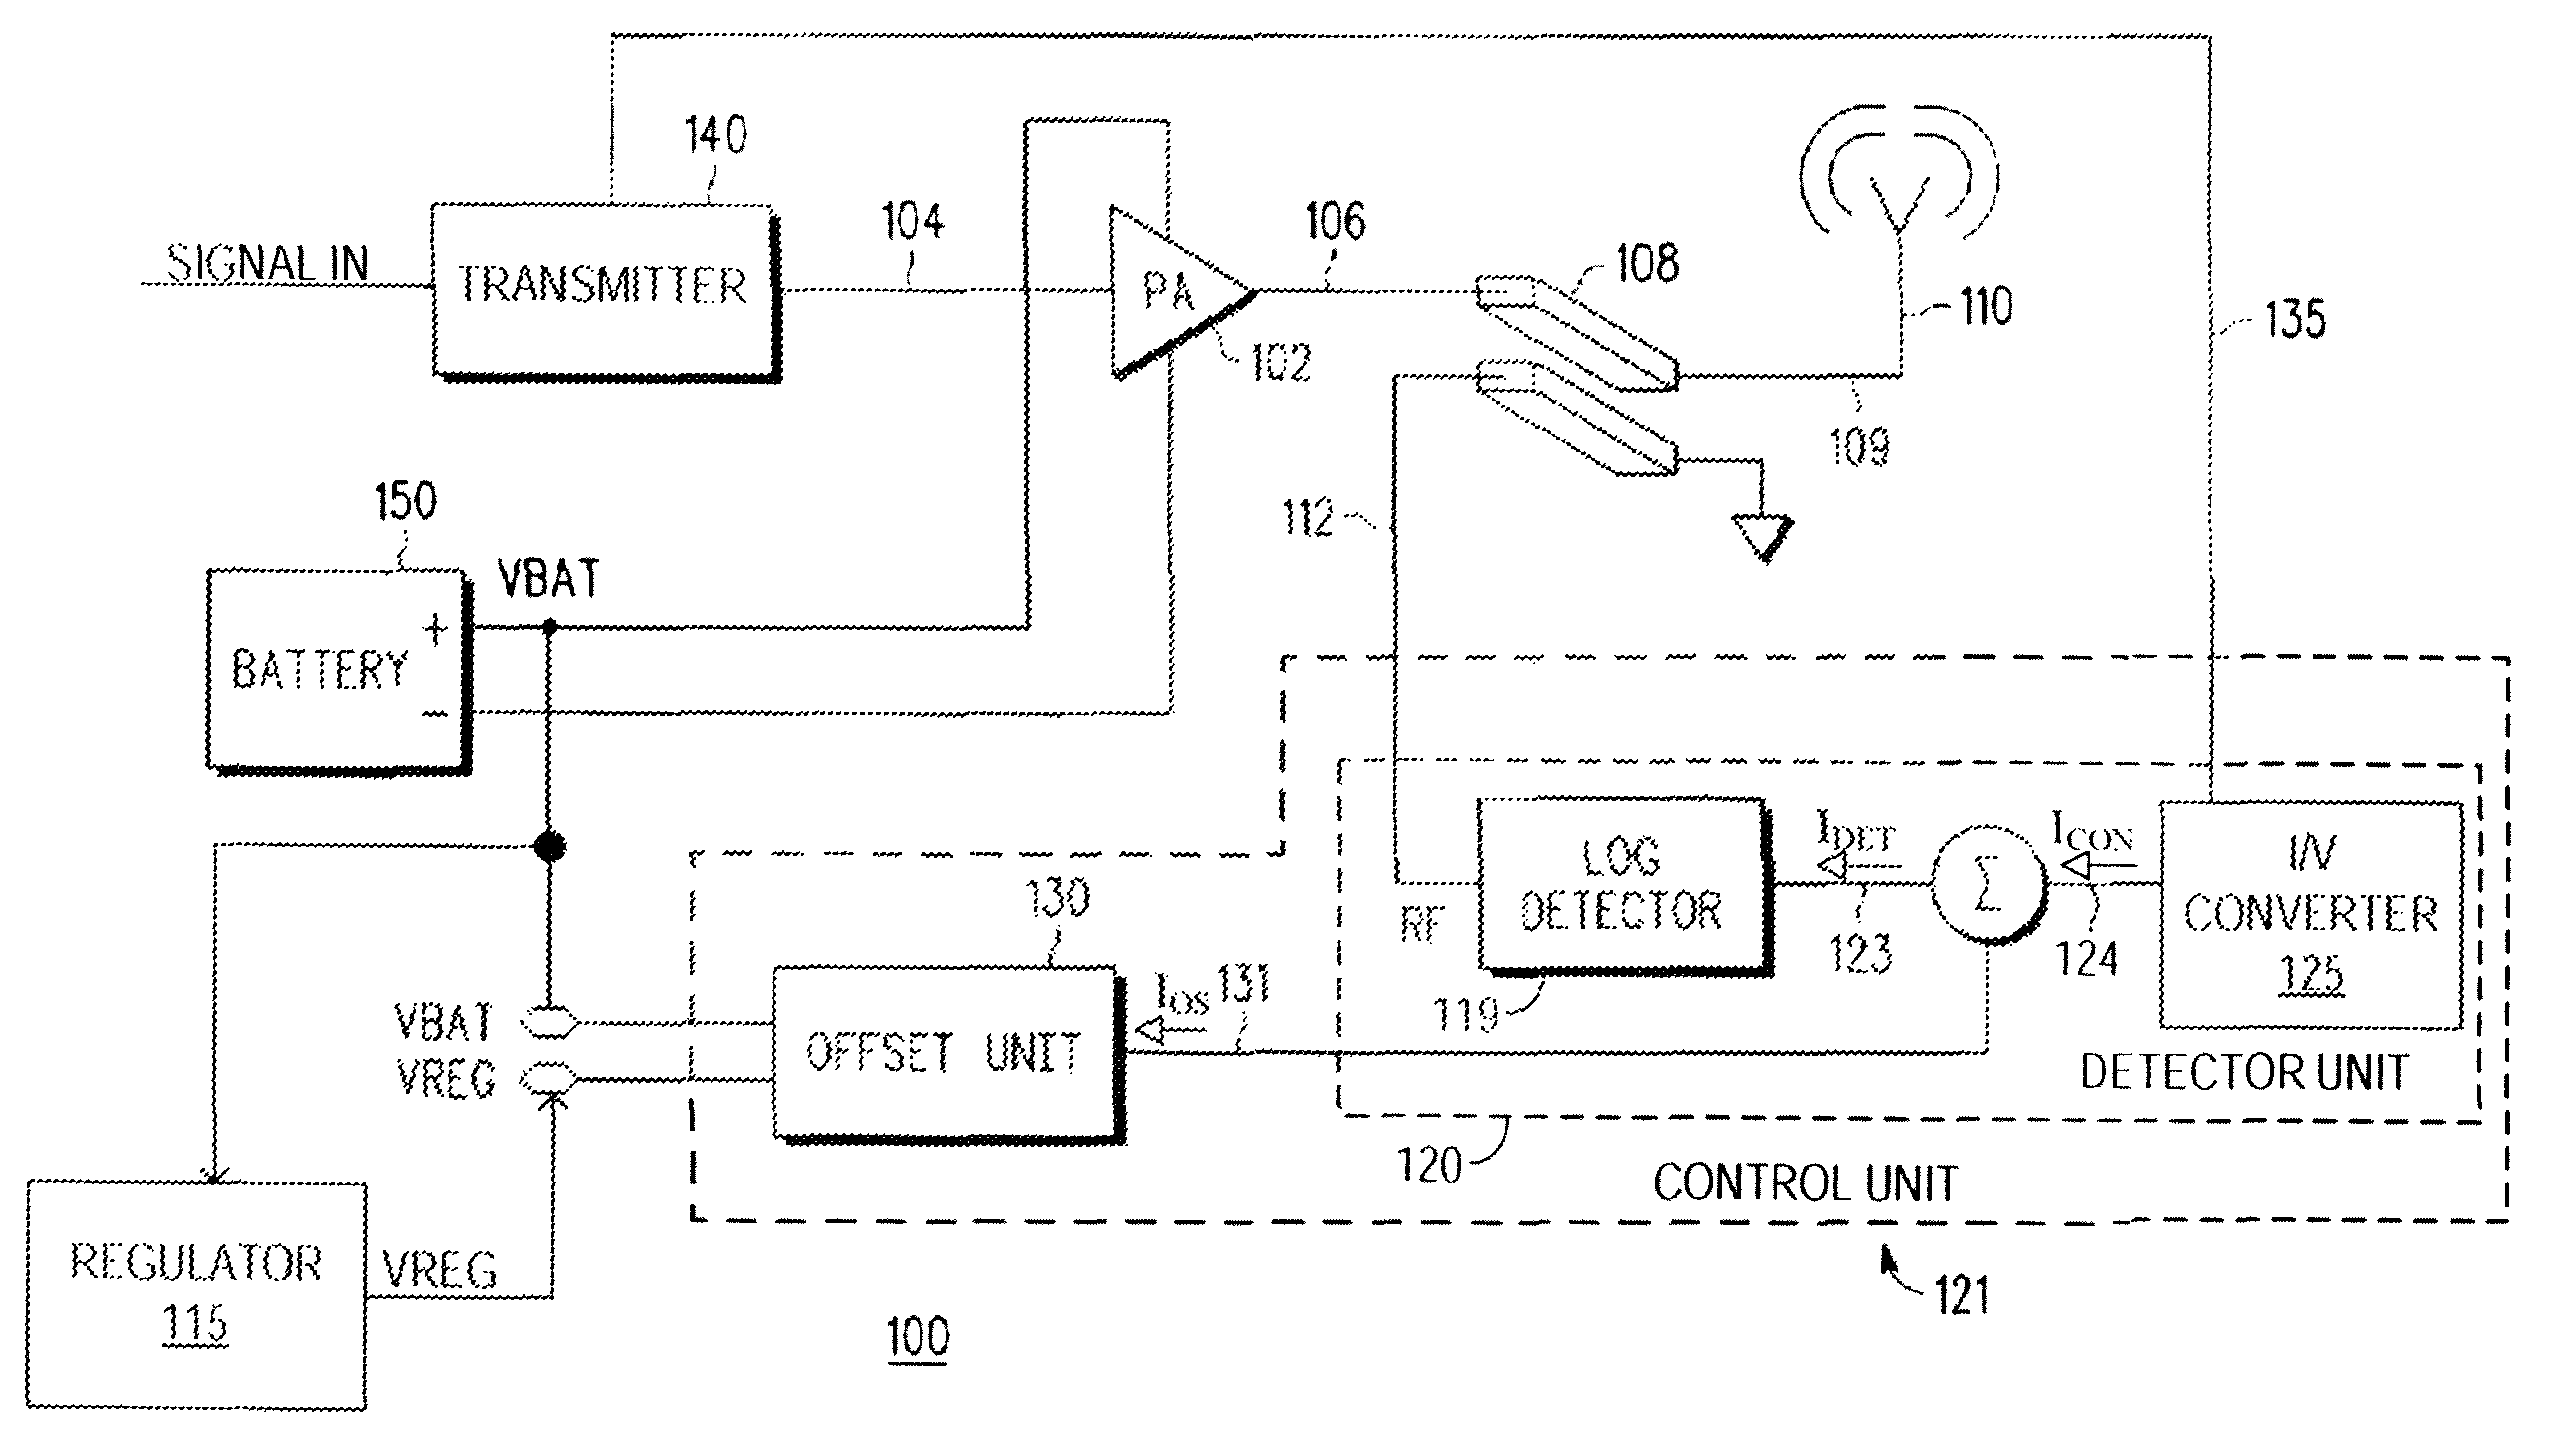 RF circuit with control unit to reduce signal power under appropriate conditions